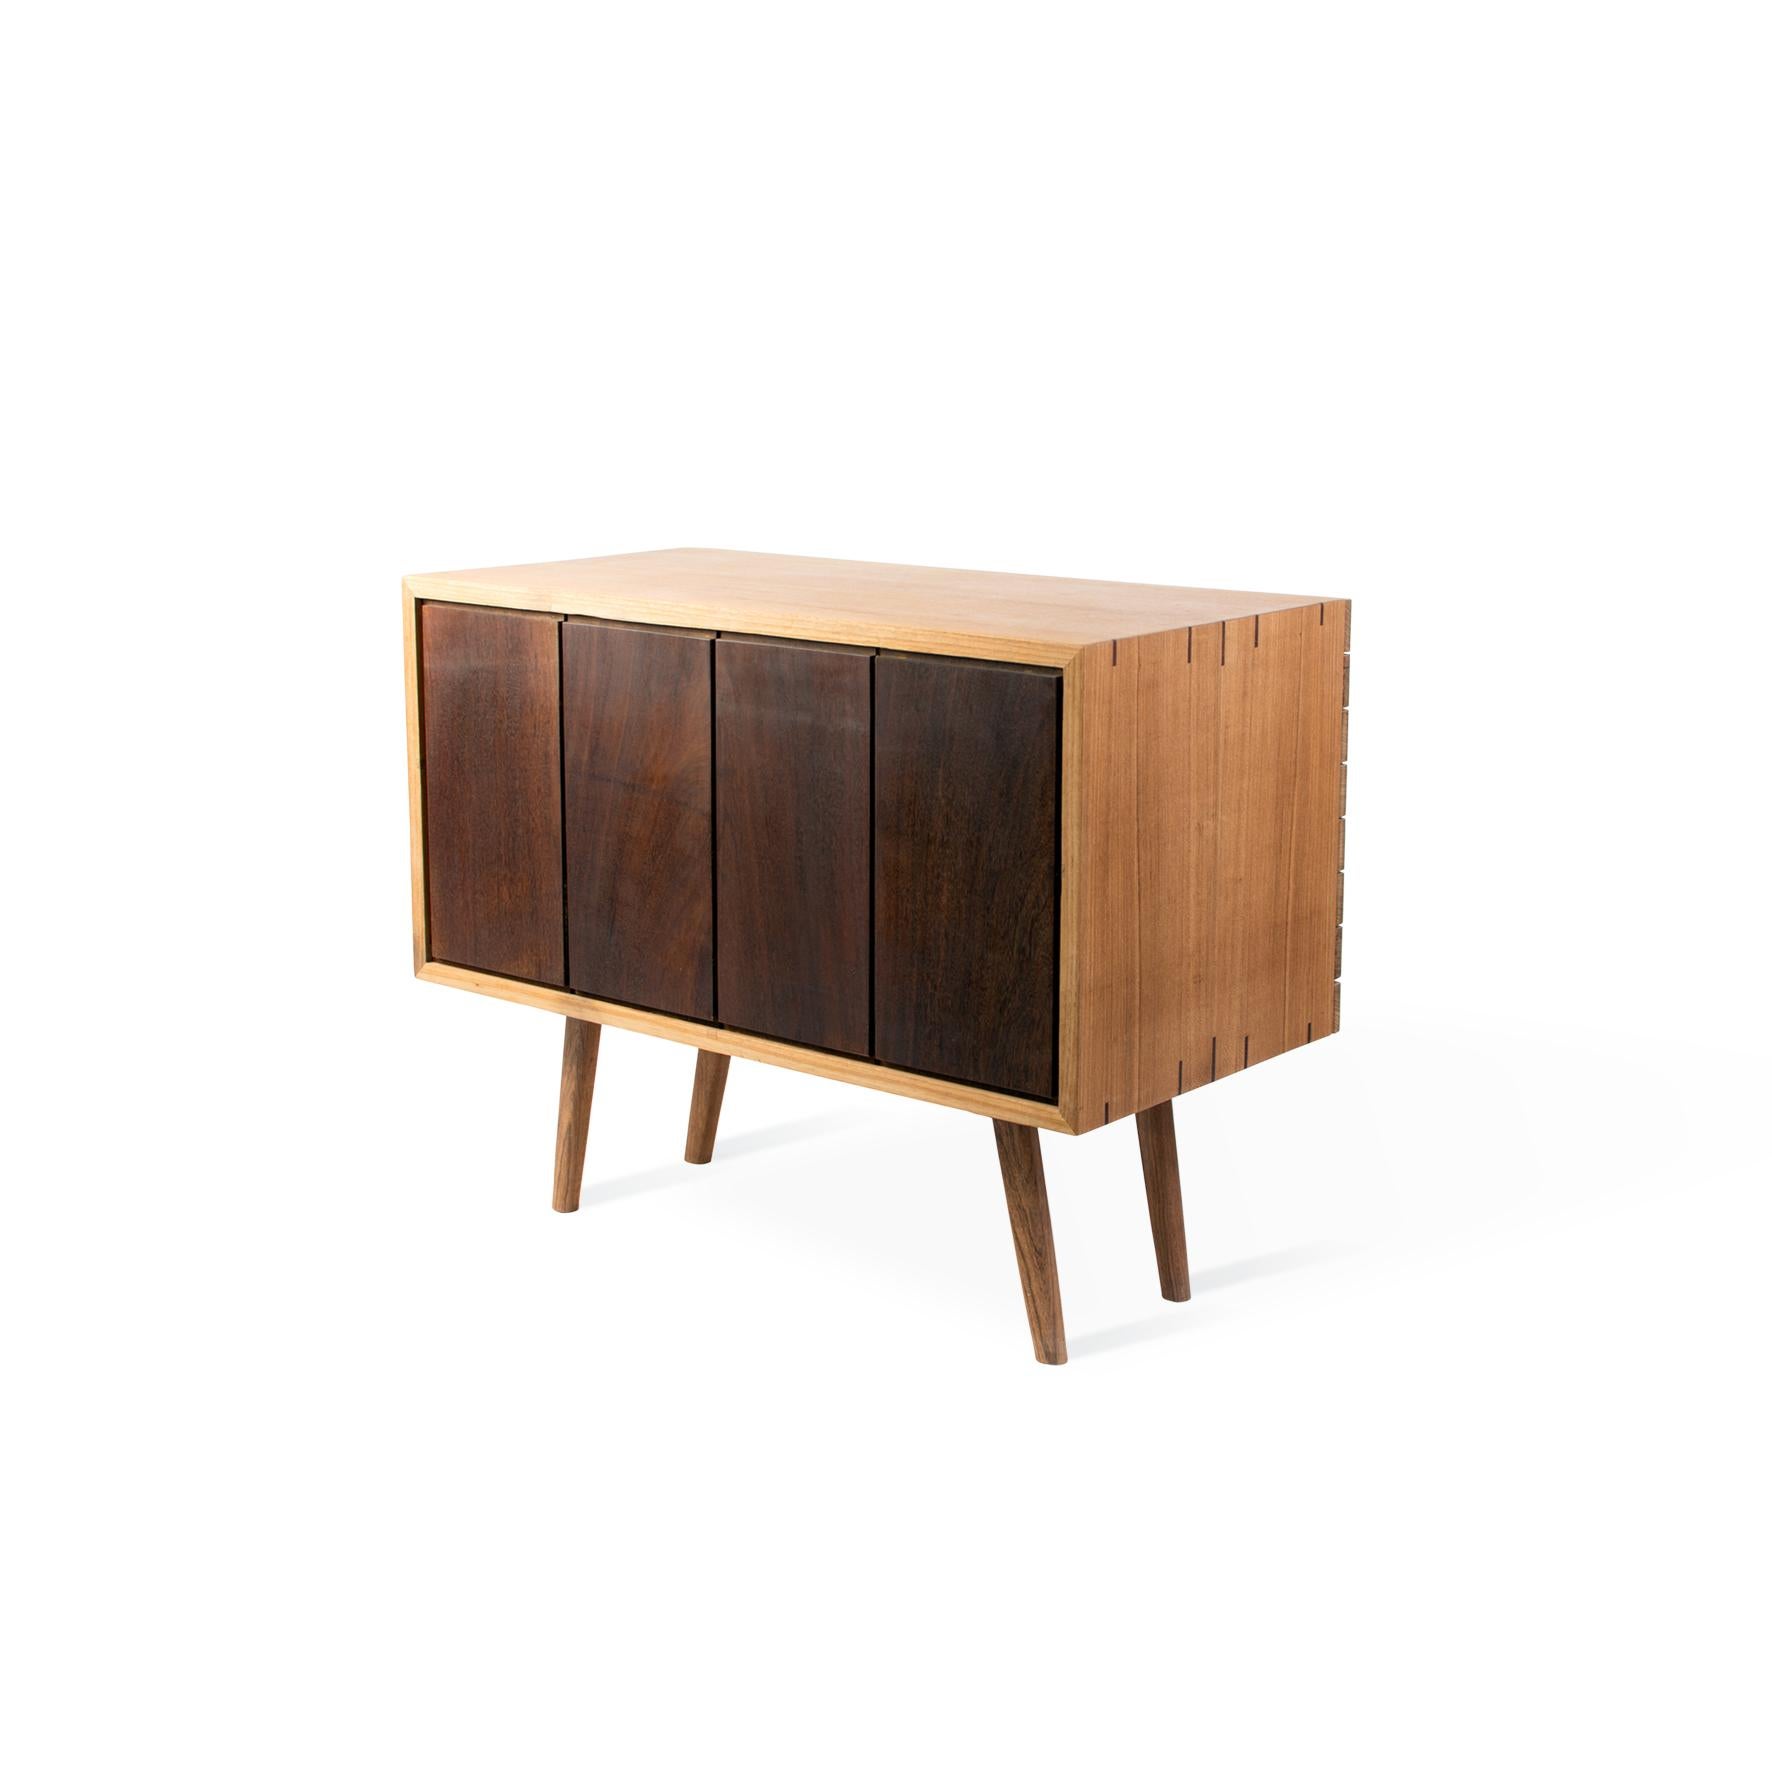 Cordilheira credenza was born as an idea to divide two spaces, it has a delicate curve on the front, and the often forgotten rear receives its own design with a dark contrasting tone. The doors have a subtle curve carved into them giving a feeling